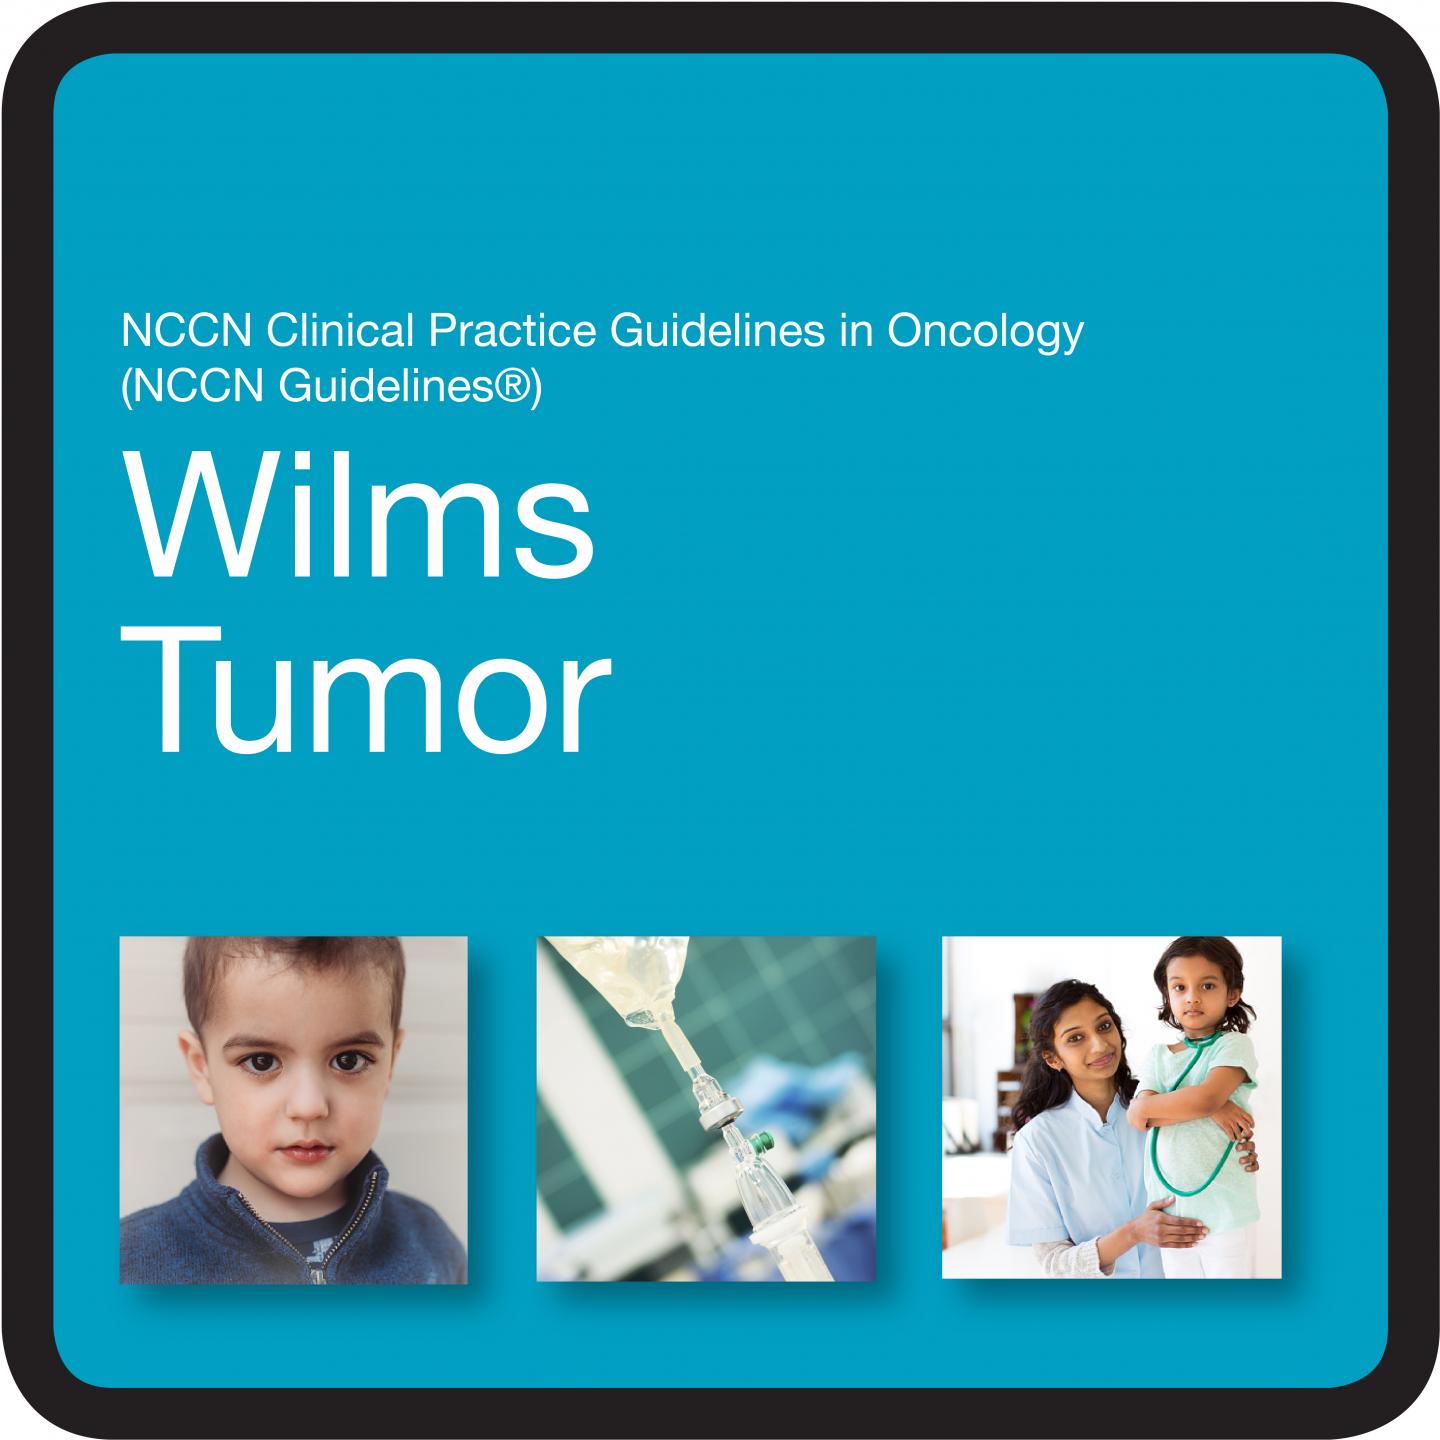 NCCN Guidelines for Wilms Tumor